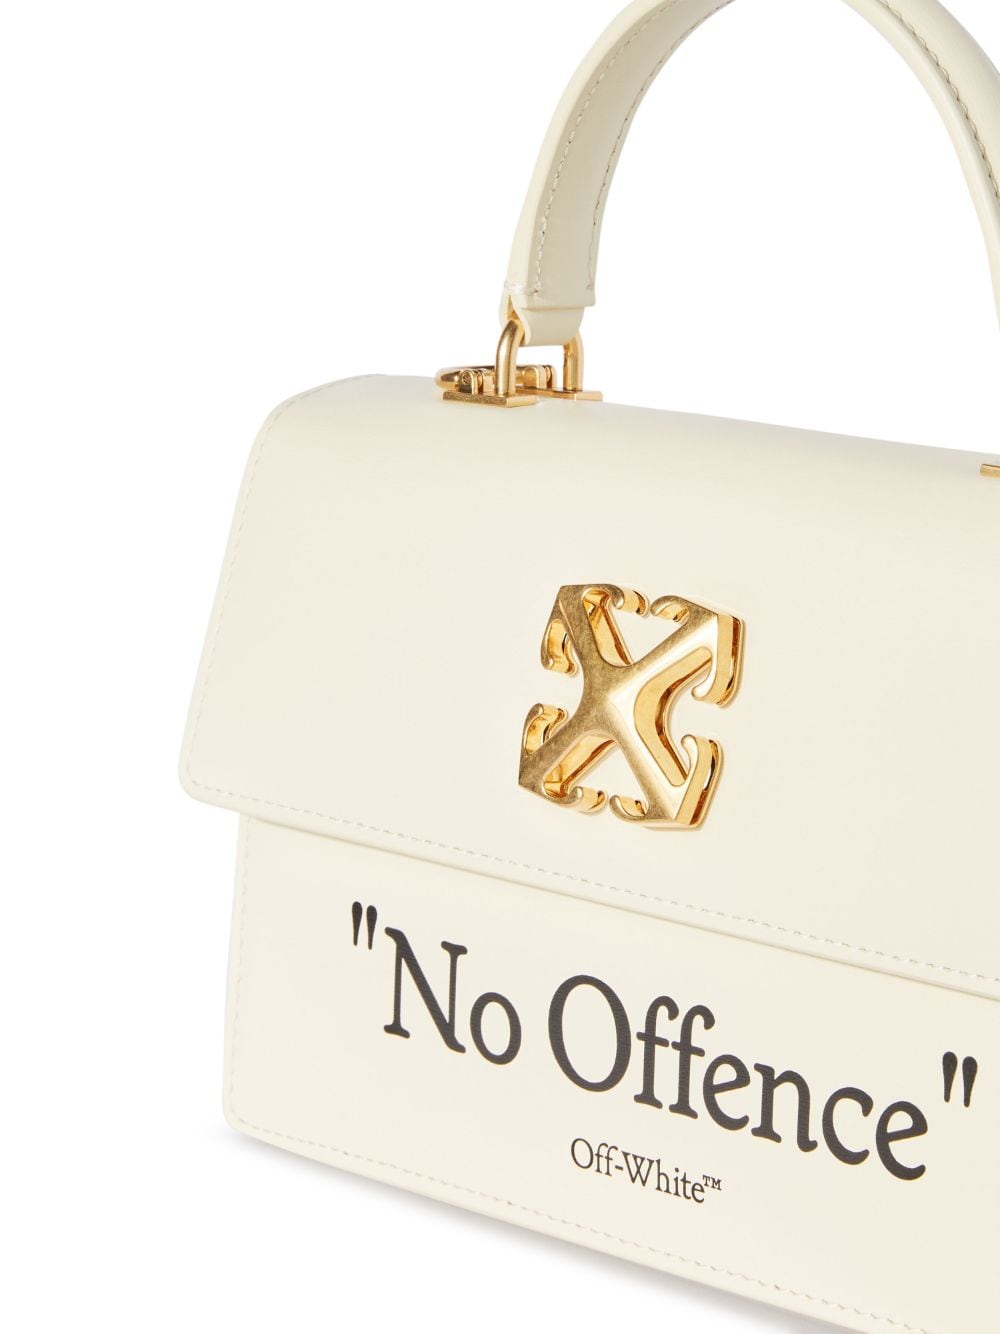 Off-white Jitney 1.4 Quote Leather Top Handle Bag In Black White